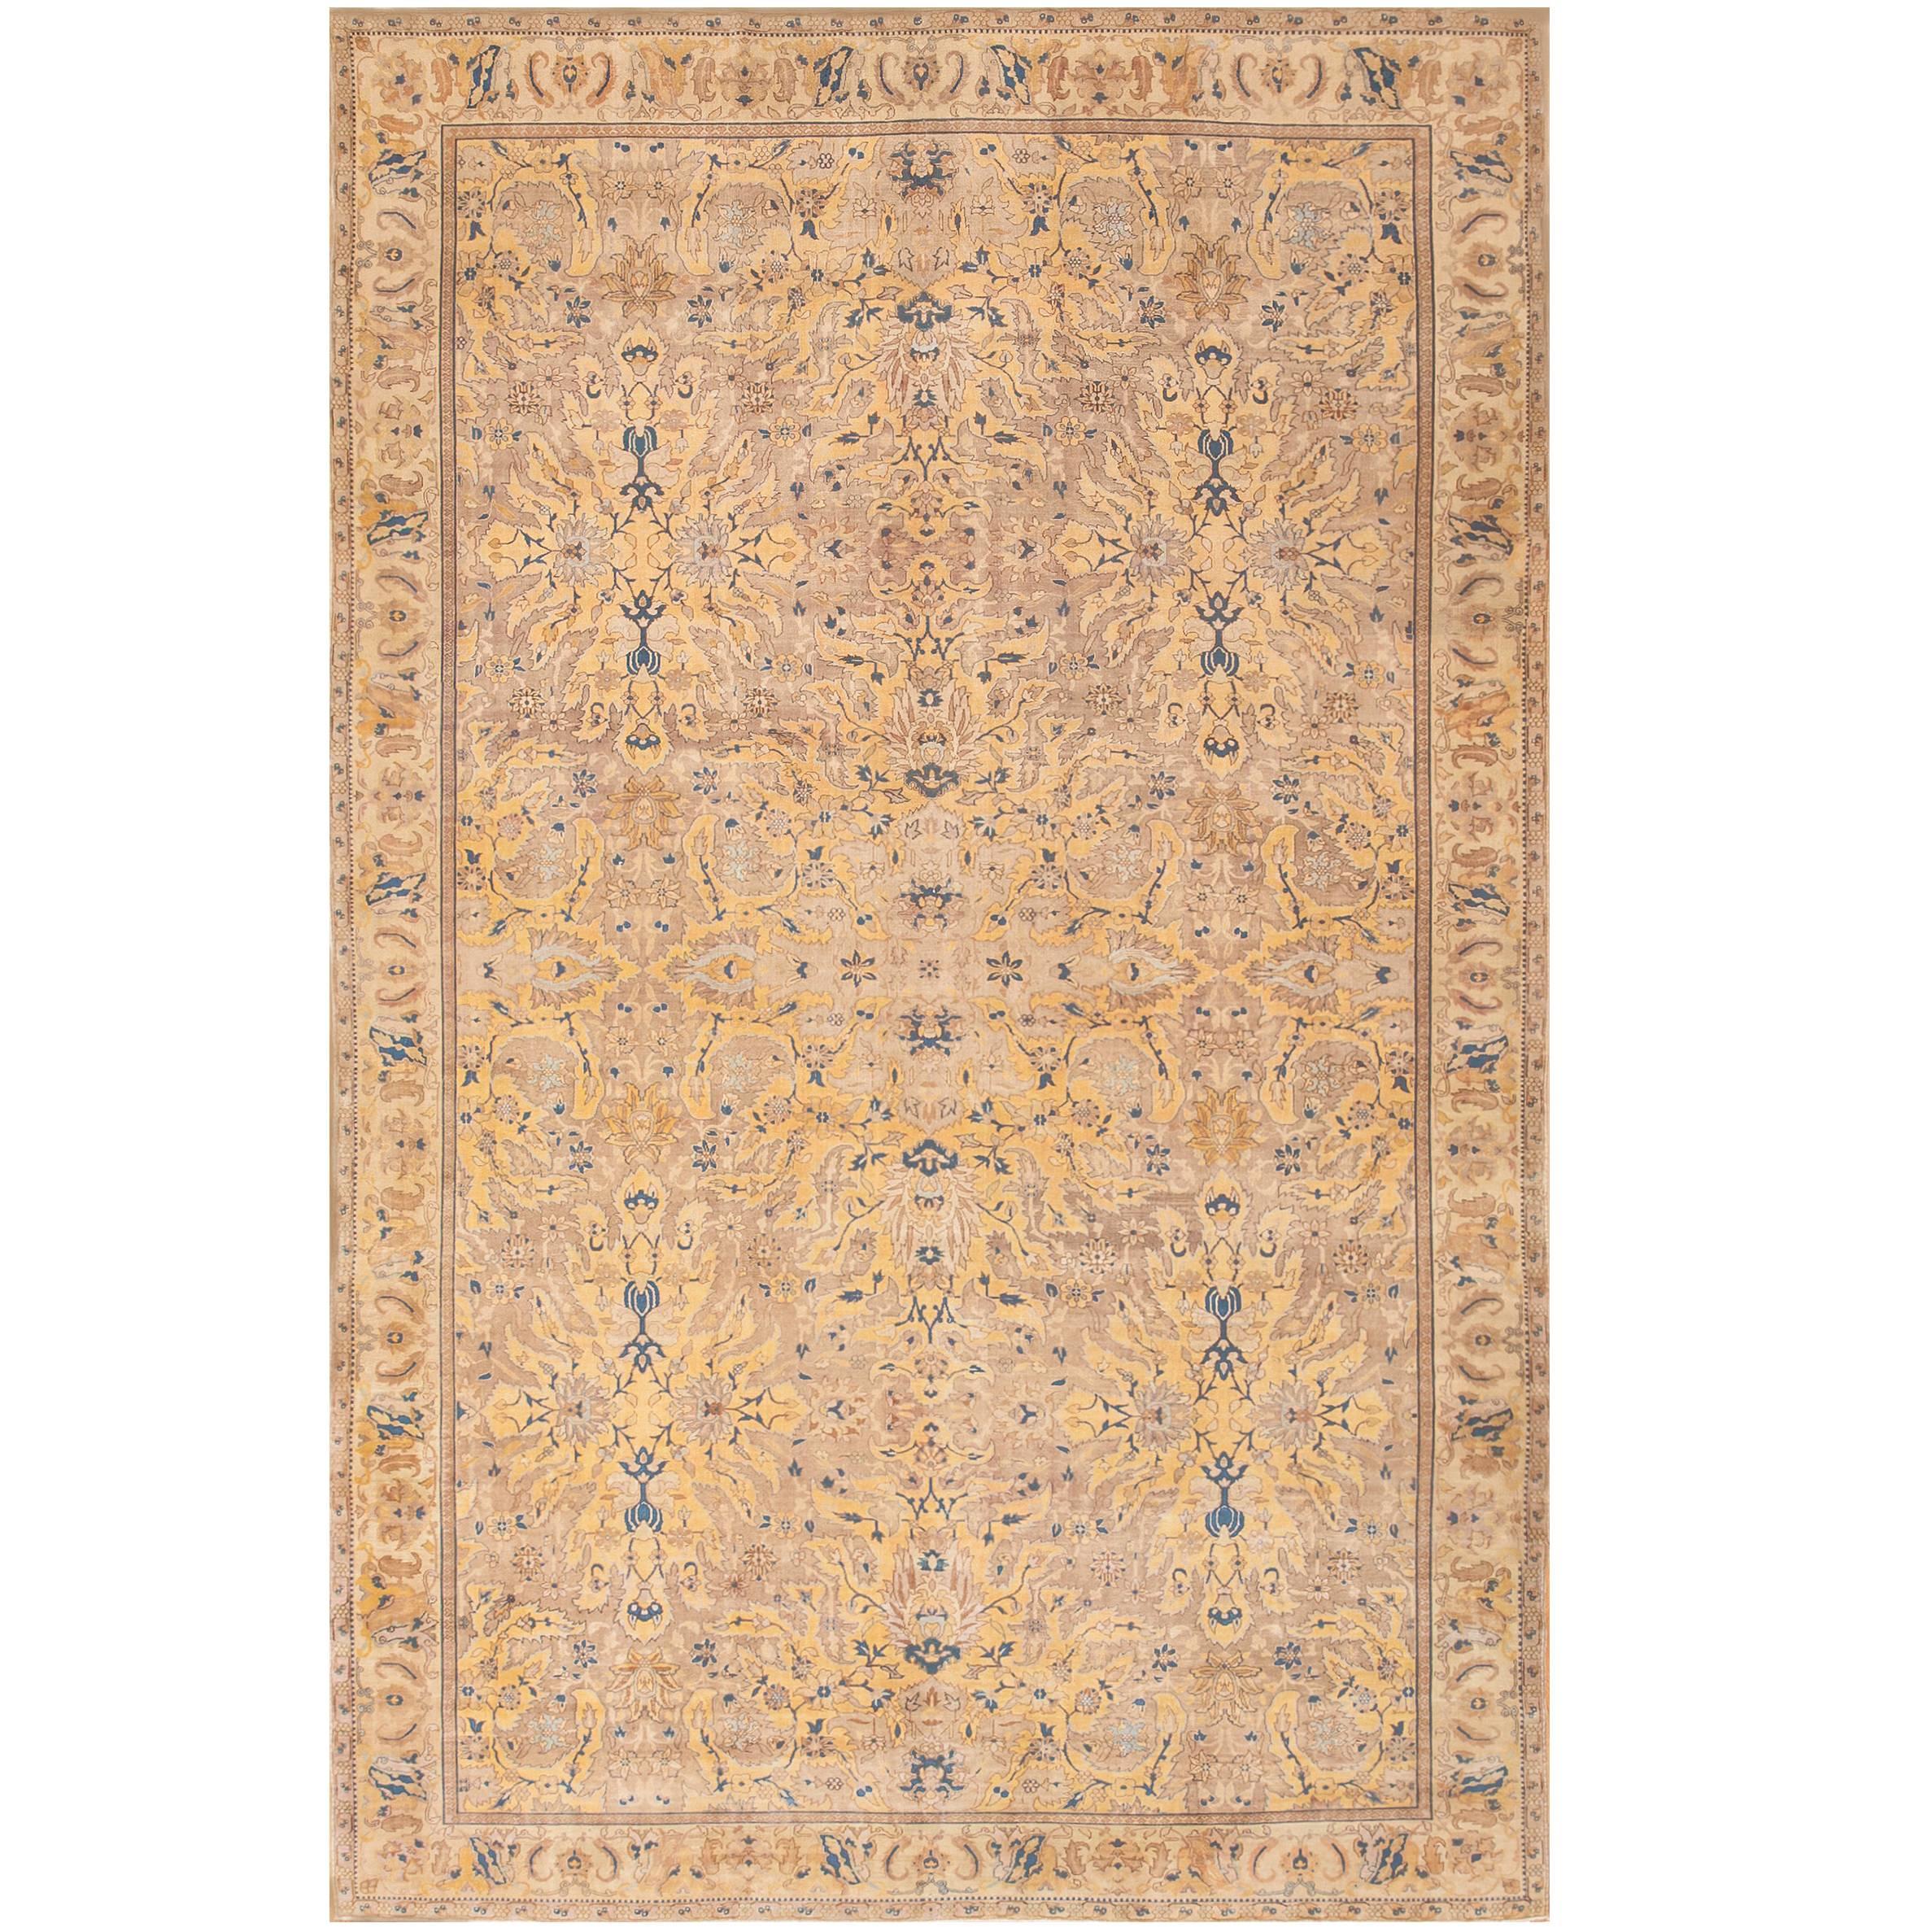 Large Polonaise Antique Indian Rug